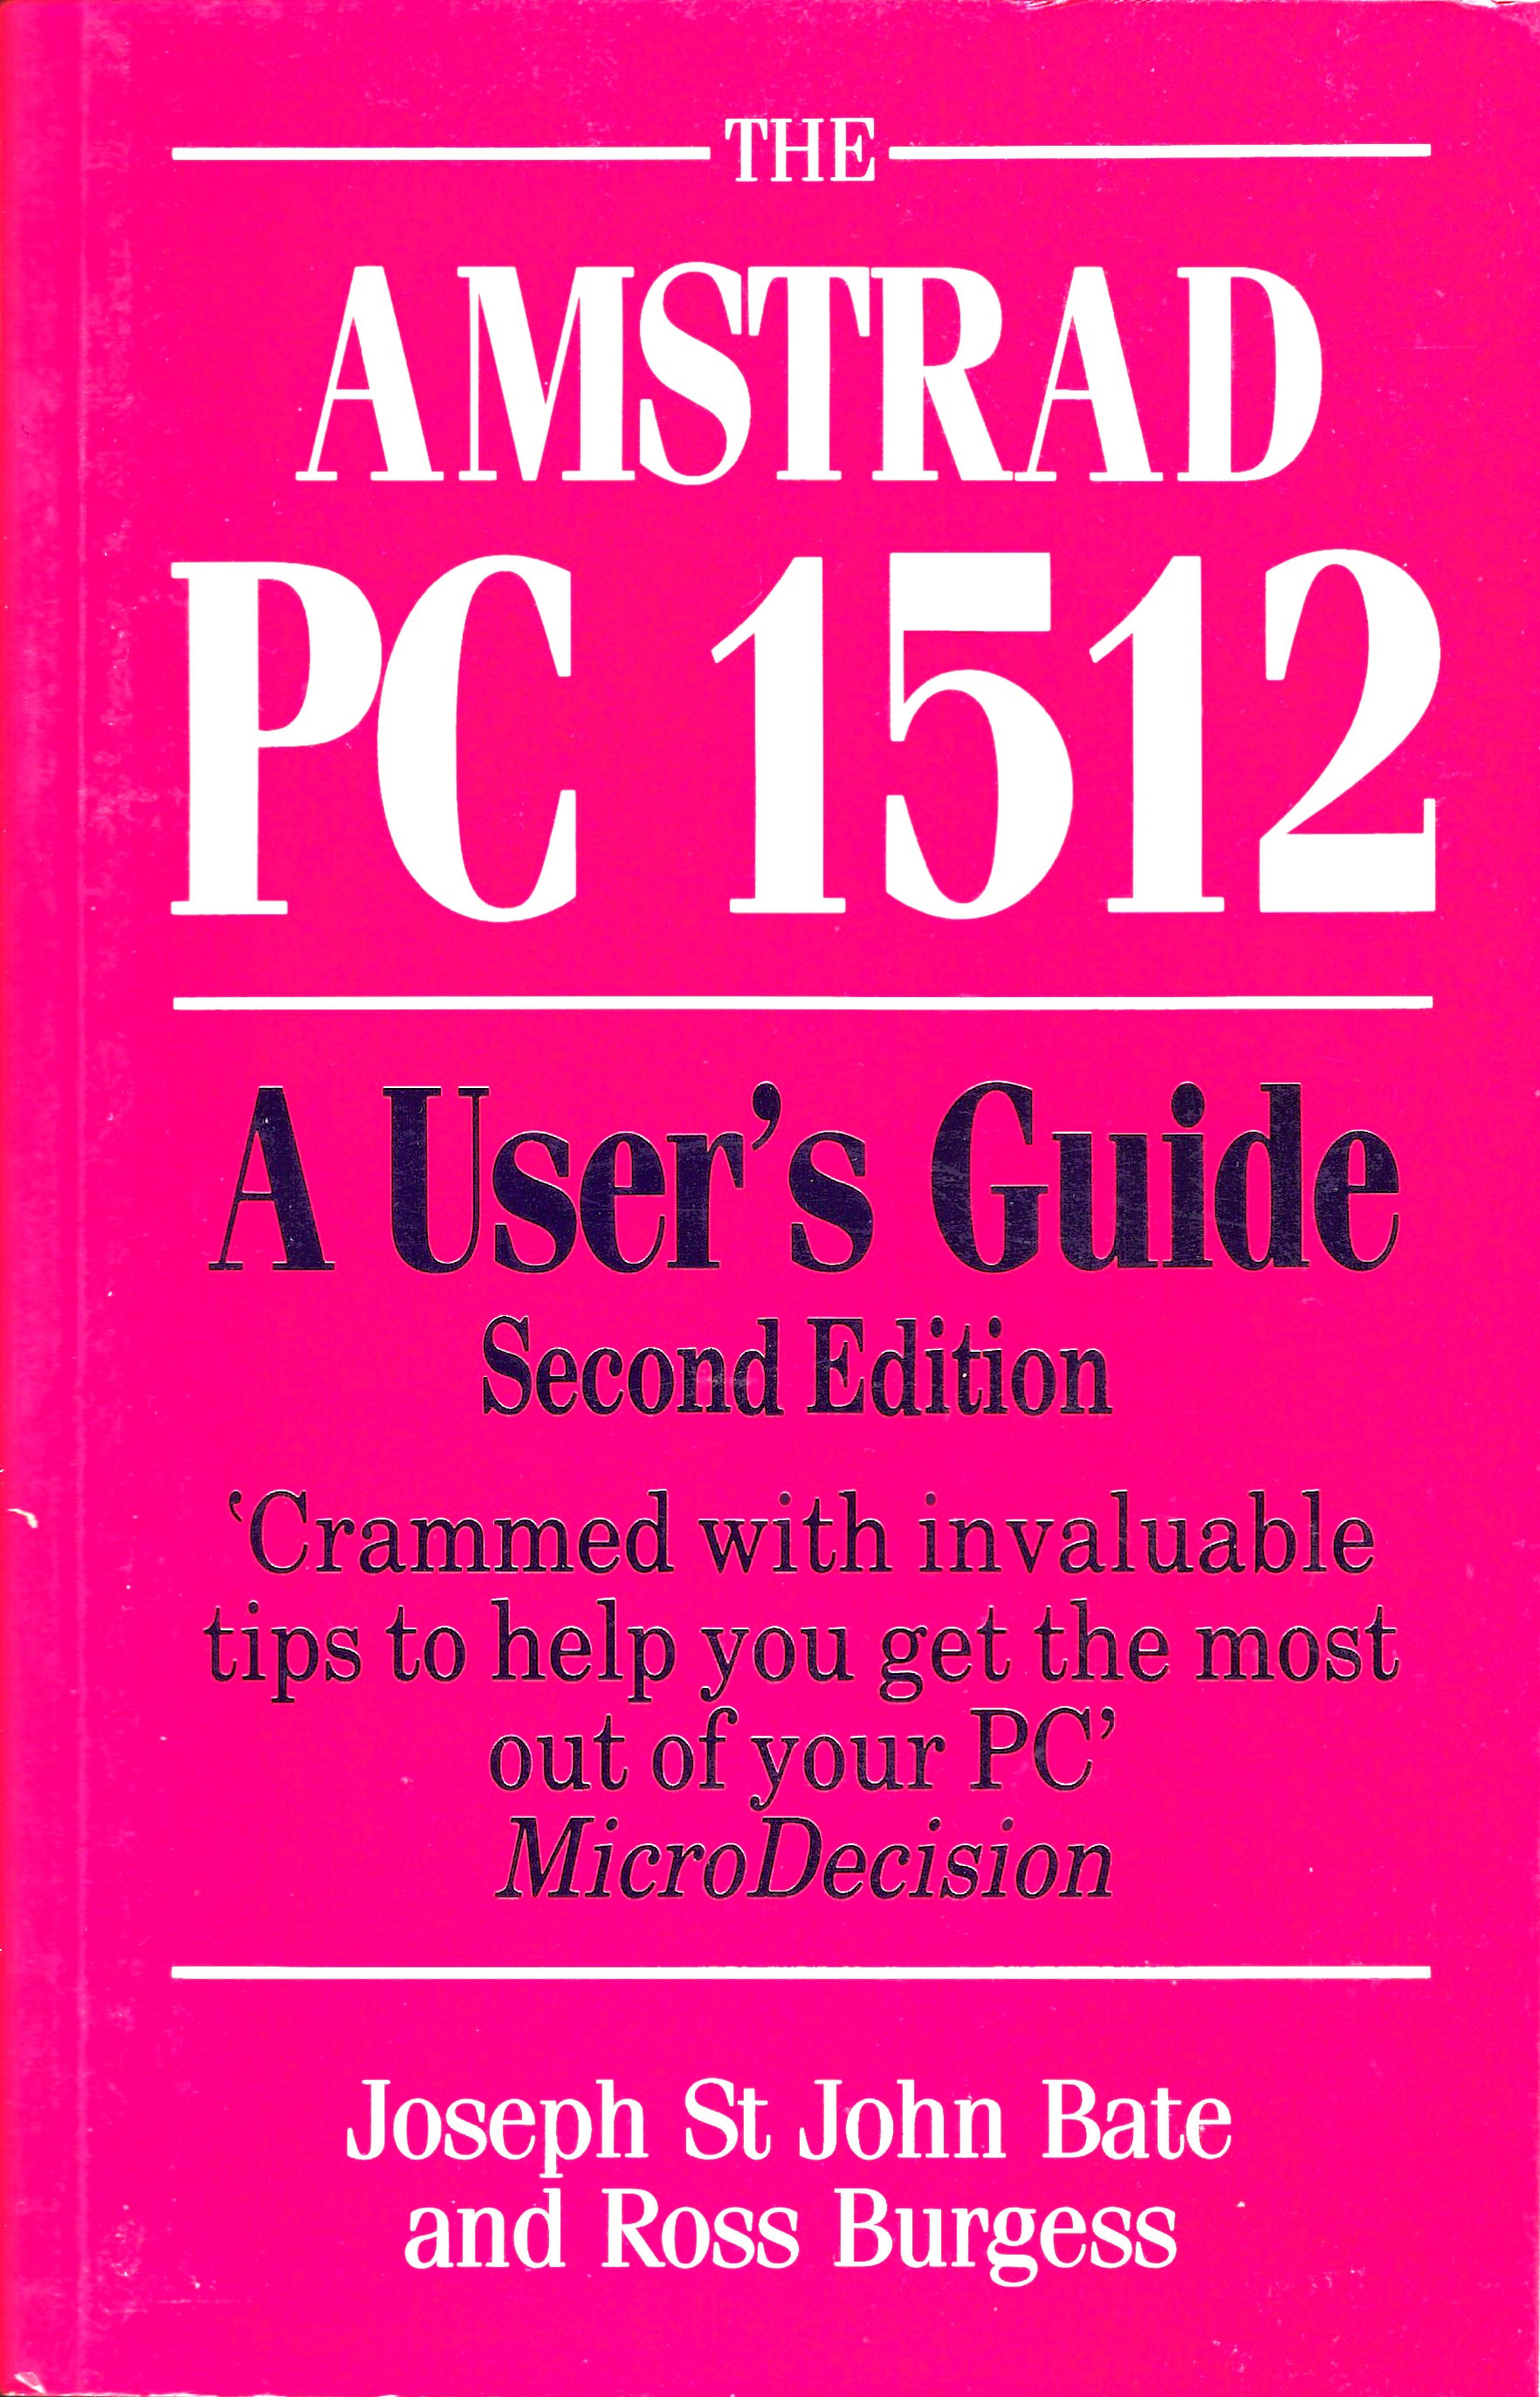 Cover of "The Amstrad PC1512: A Users's Guide" (2nd edition)